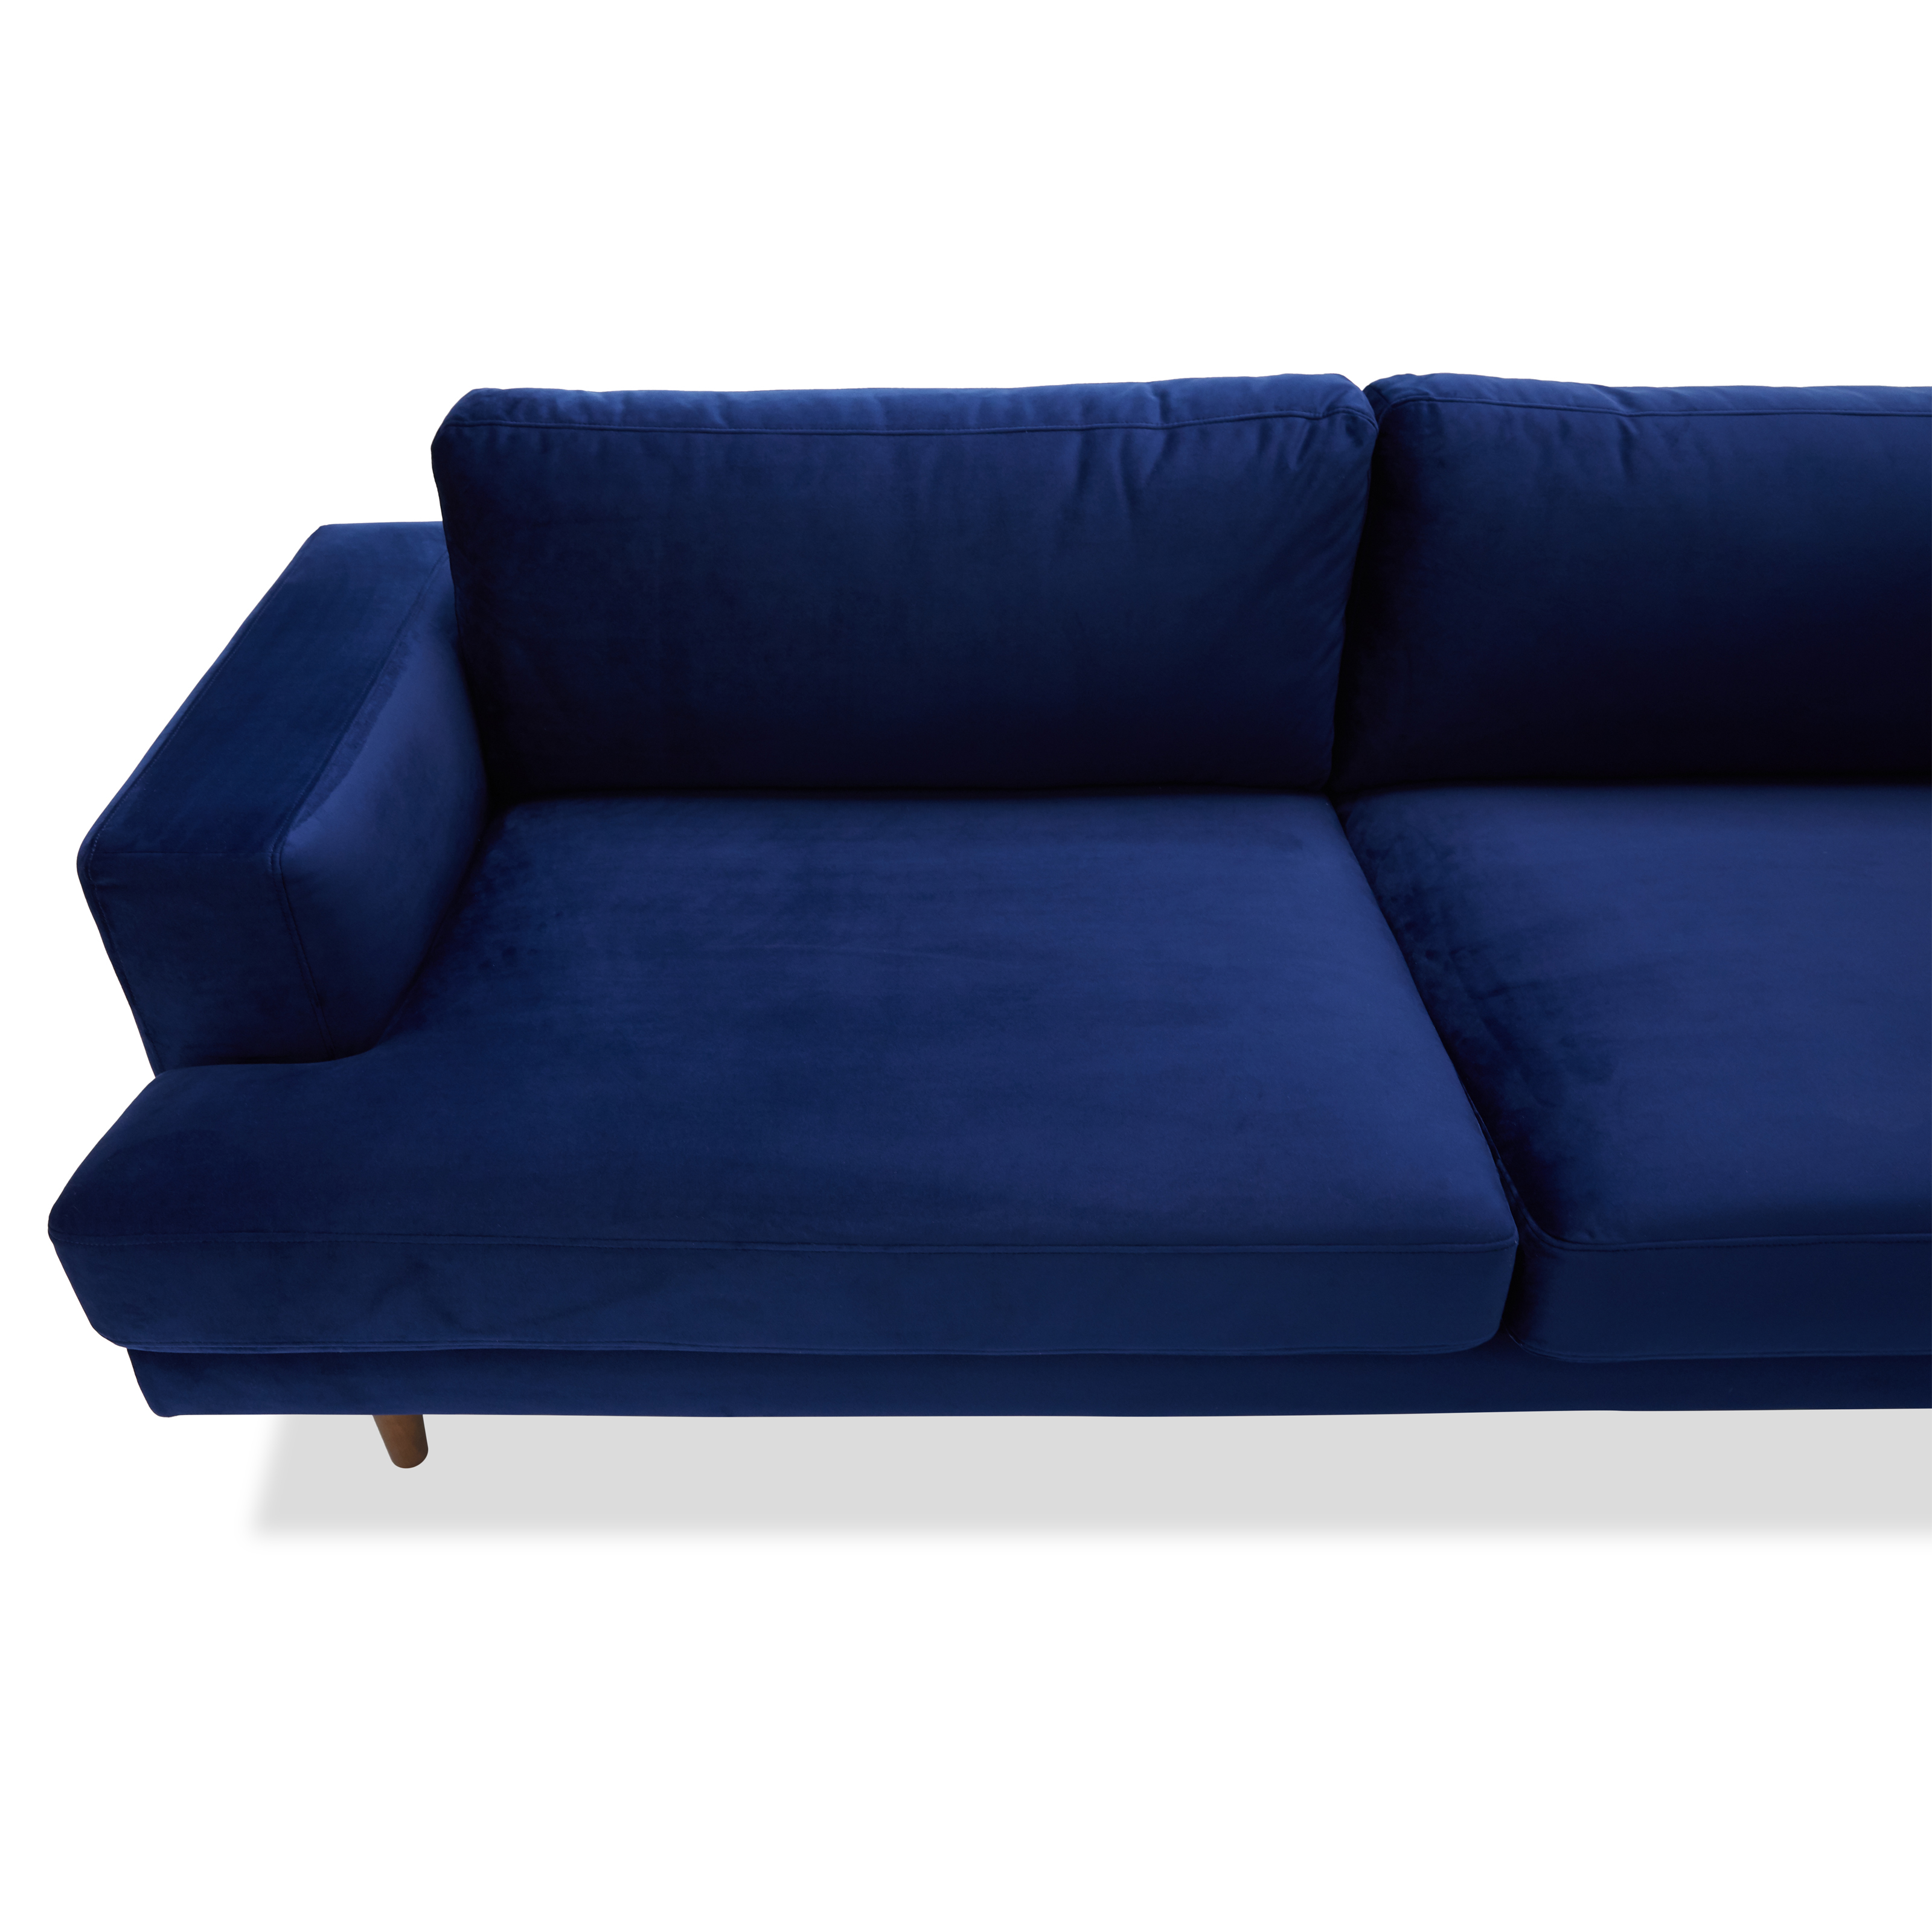 Drew Barrymore Flower Home Sofa, Multiple Colors - image 8 of 12